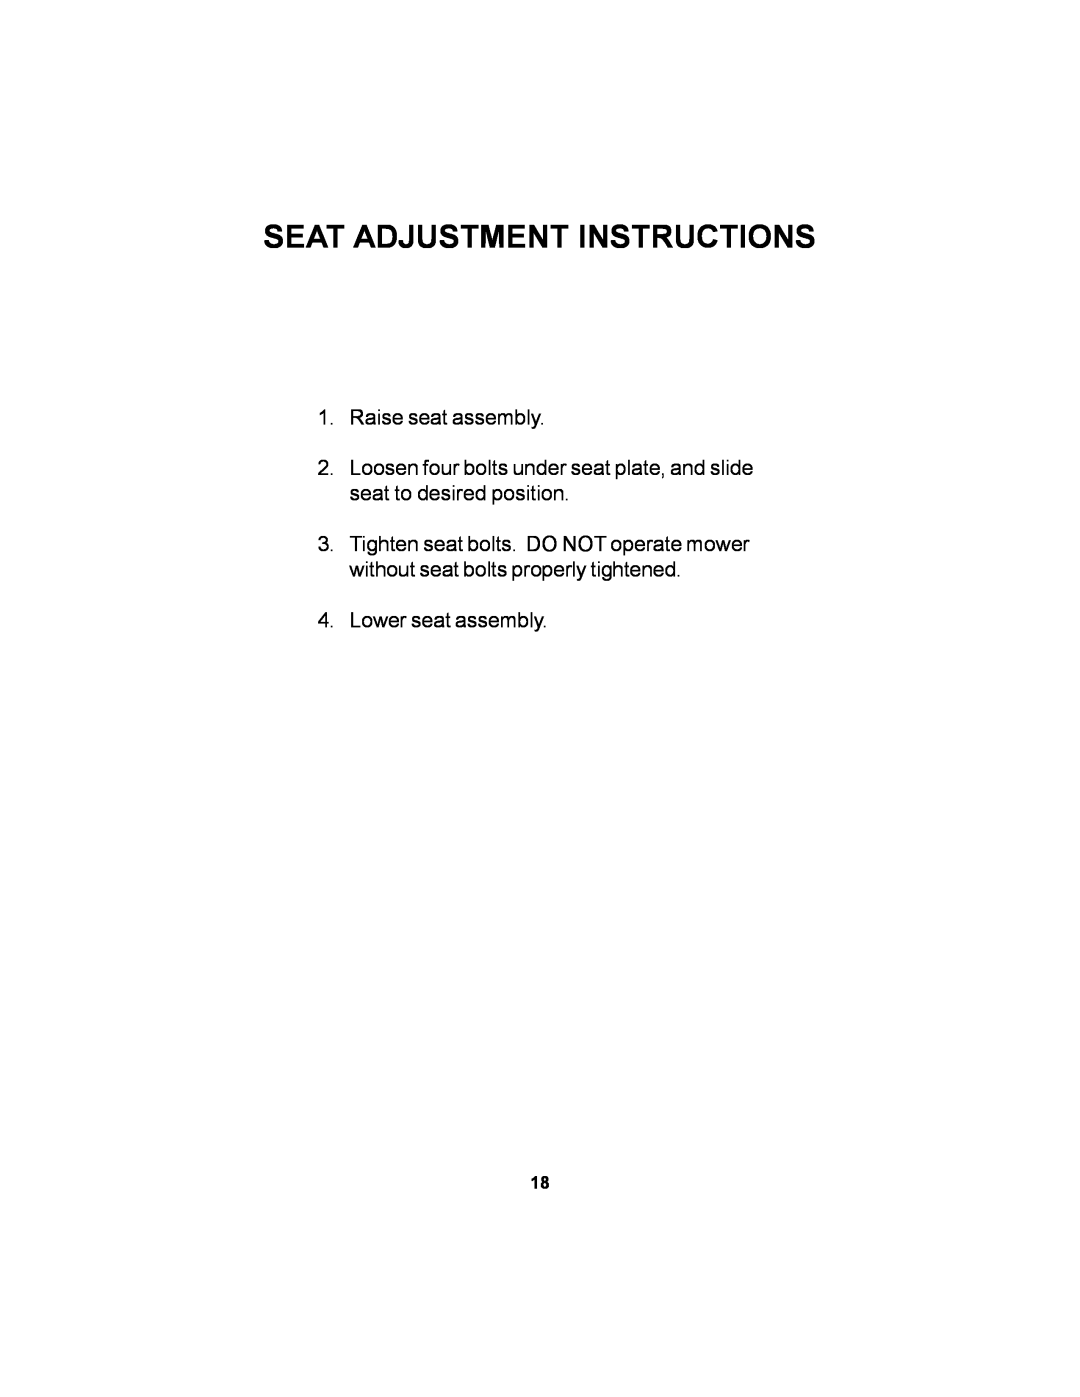 Dixon 36 manual Seat Adjustment Instructions, Raise seat assembly, Lower seat assembly 